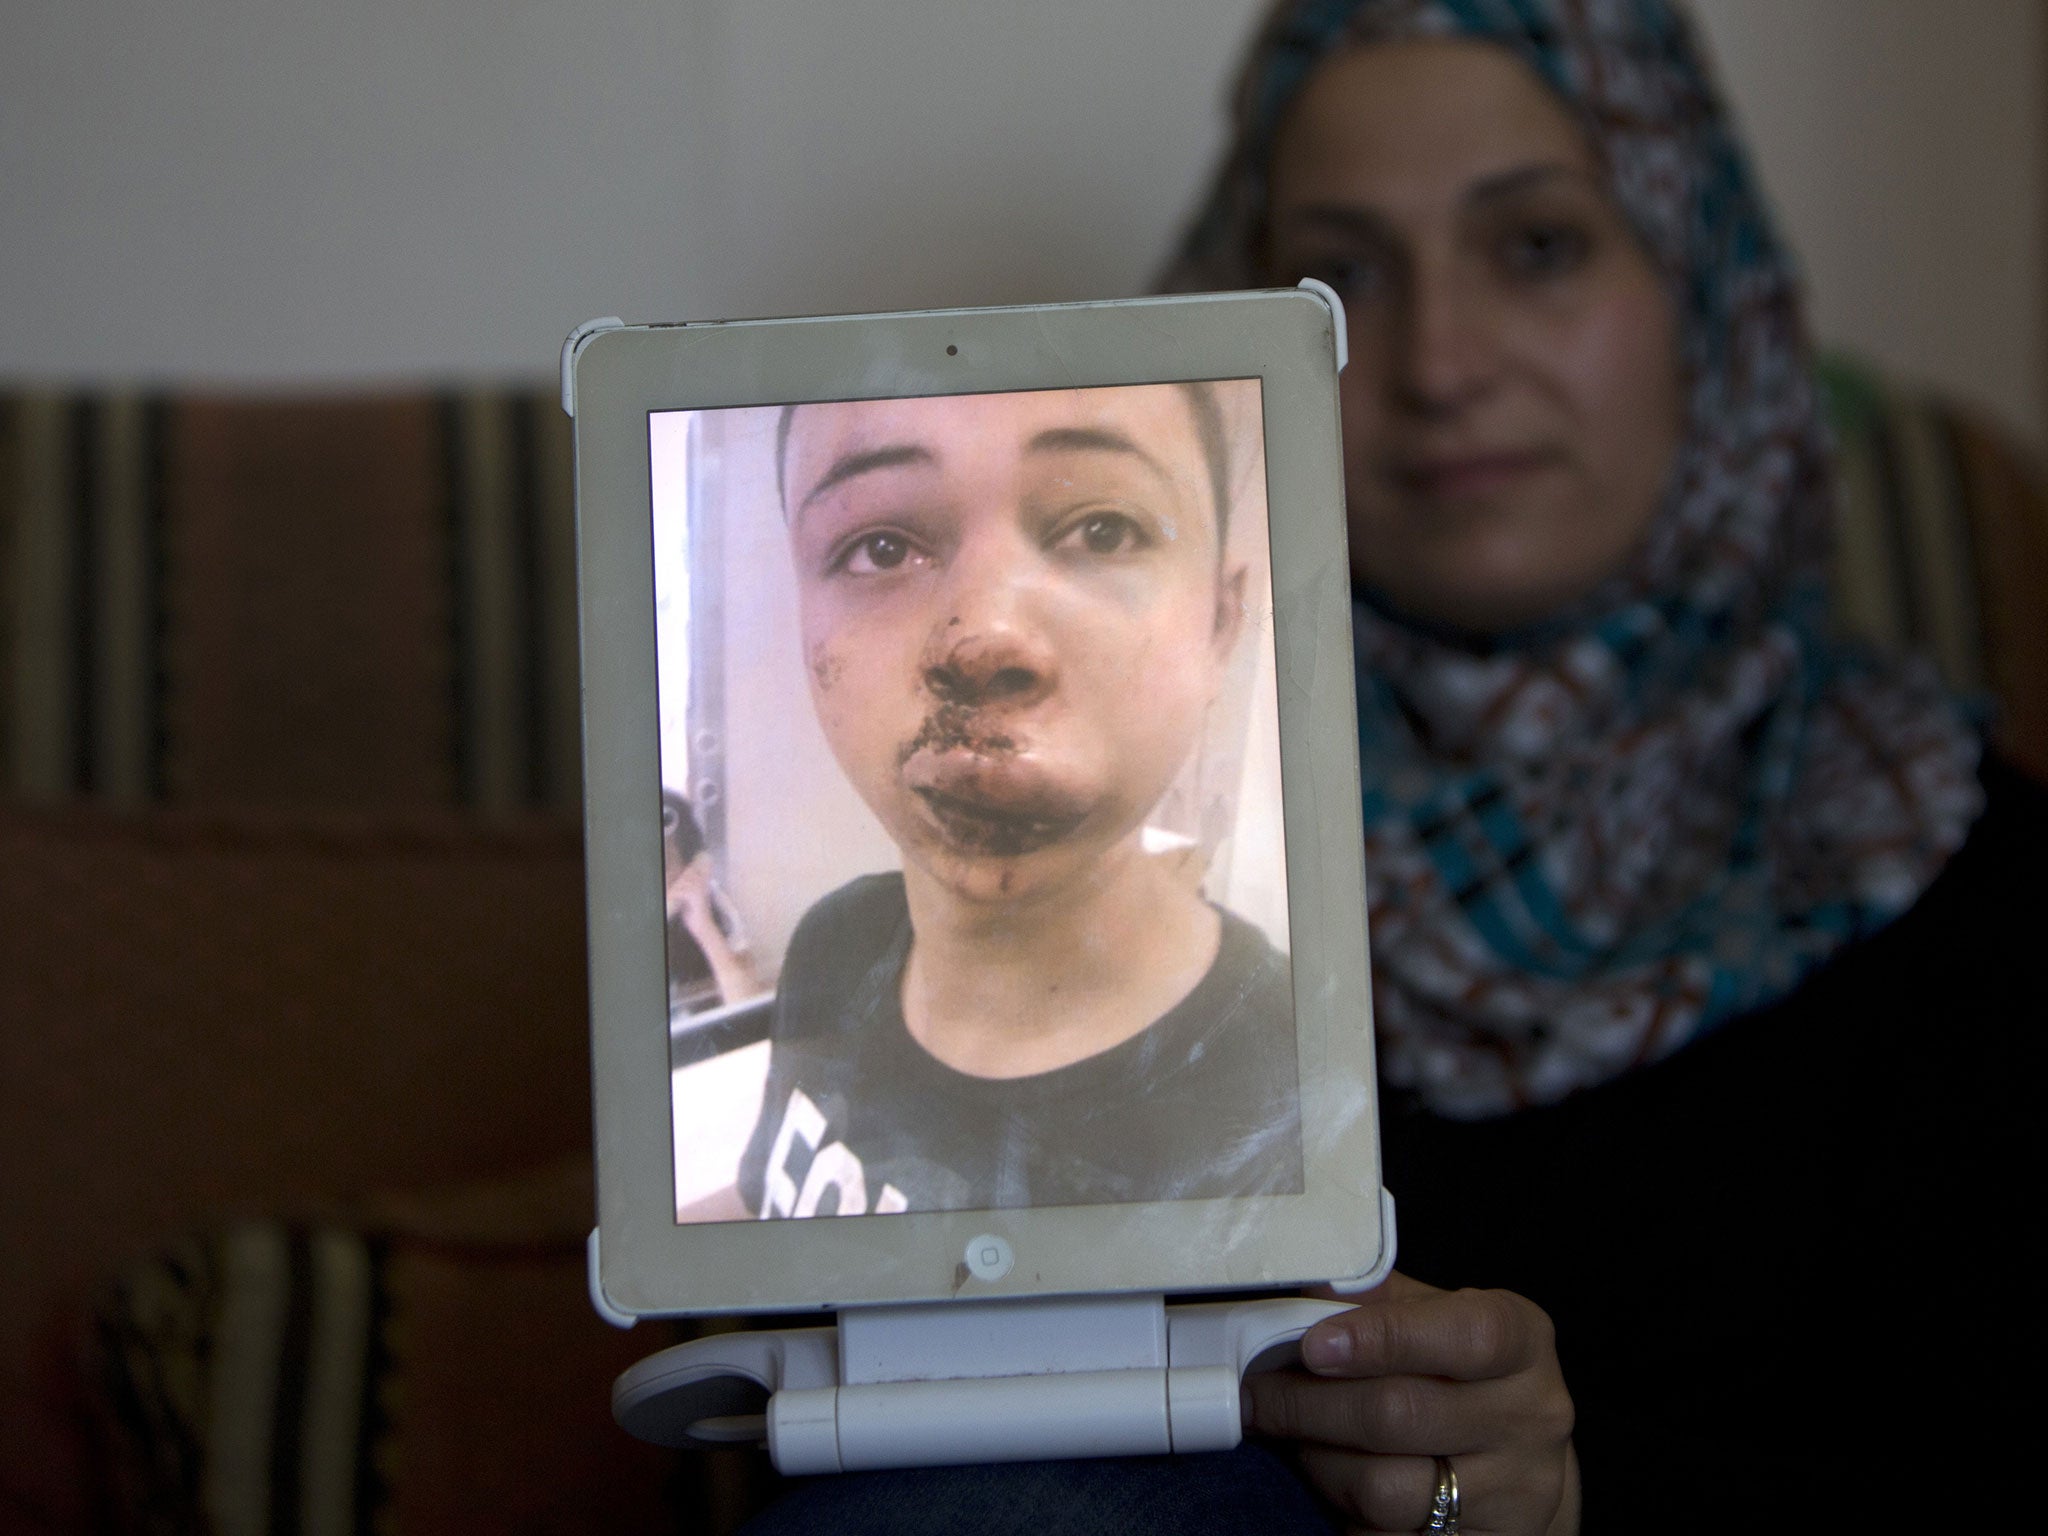 The mother of Tariq Abu Khdeir, who was allegedly beaten by Israeli police, holds up a picture of her son's swollen and bloodied face.